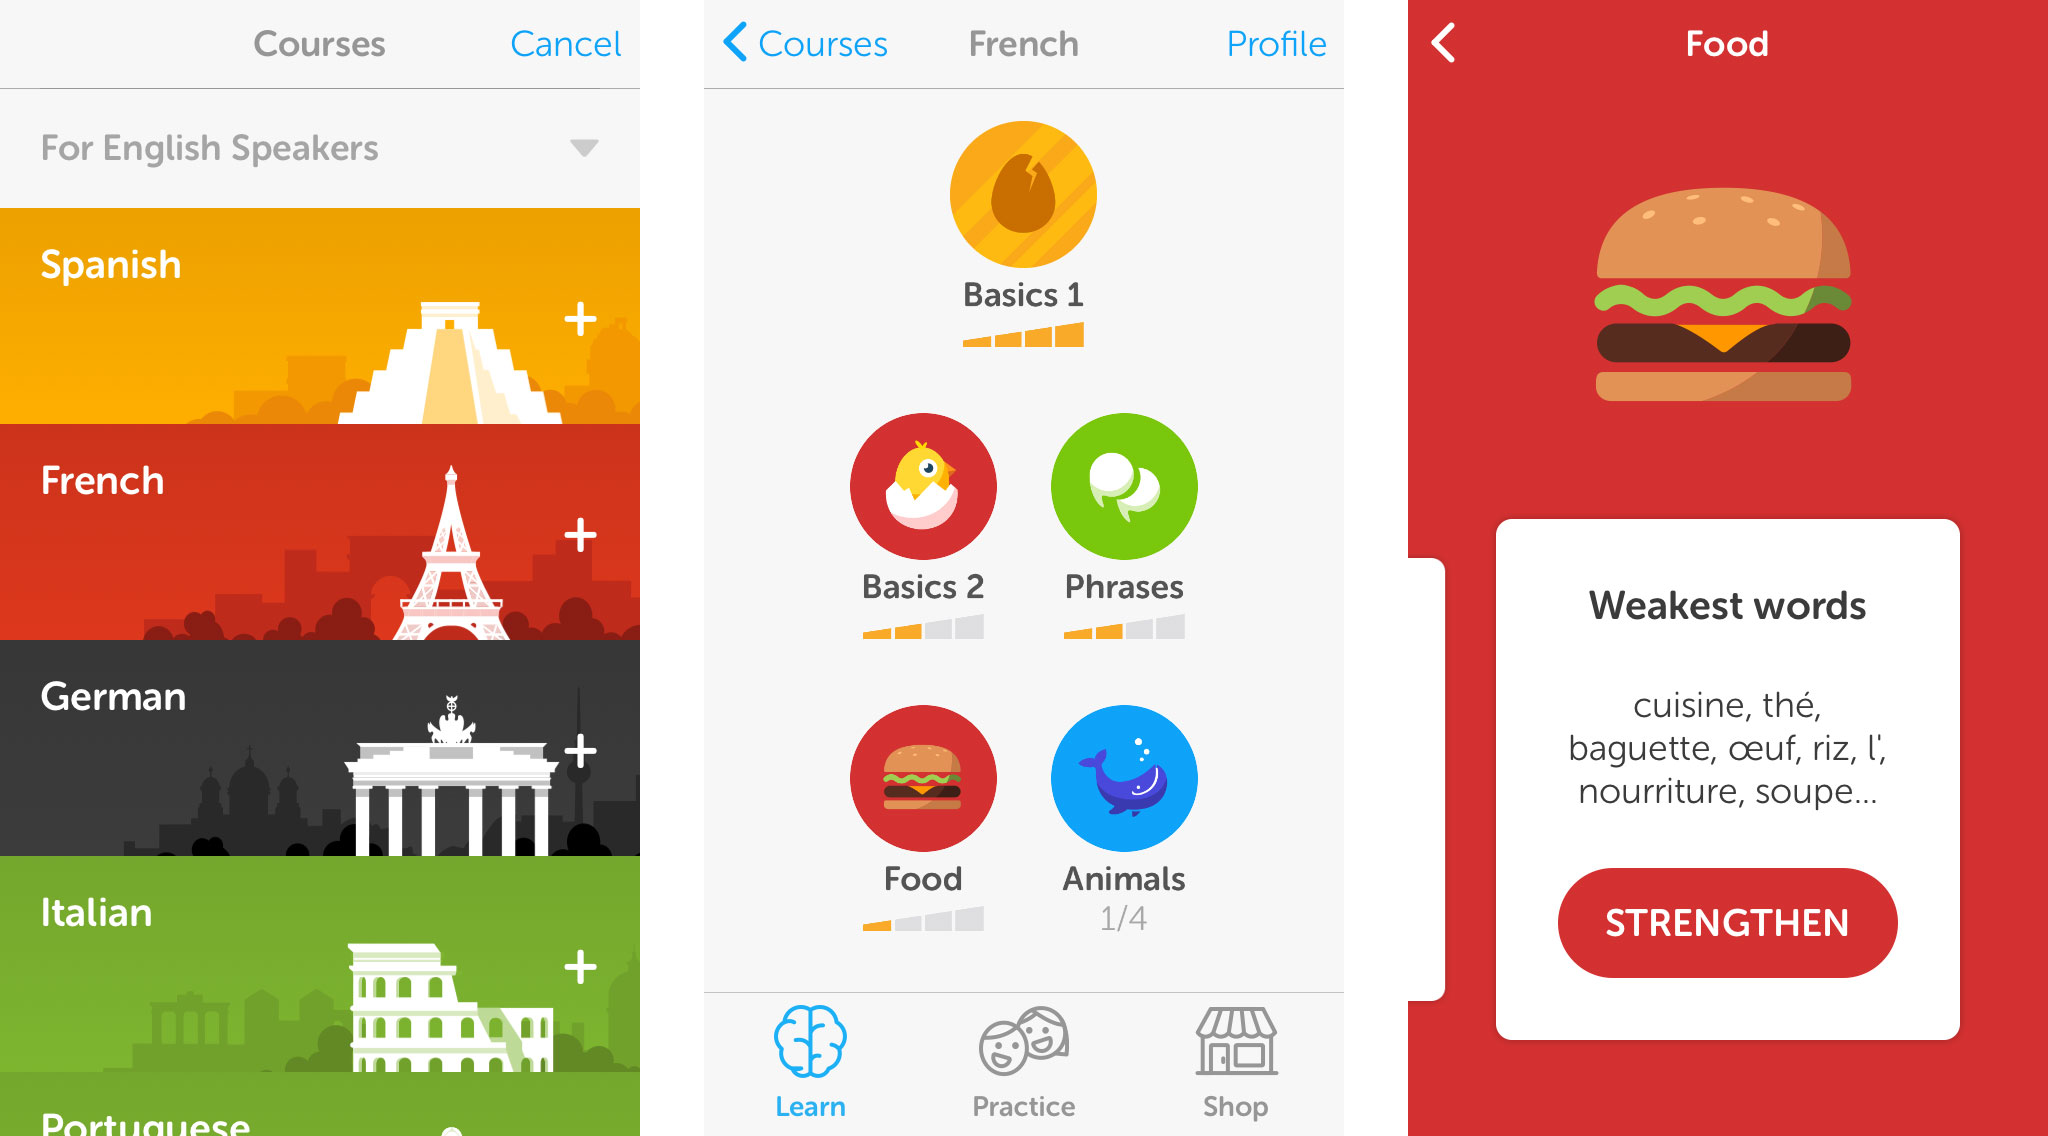 Best travel companion apps for iPhone: Foursquare, Airbnb ...